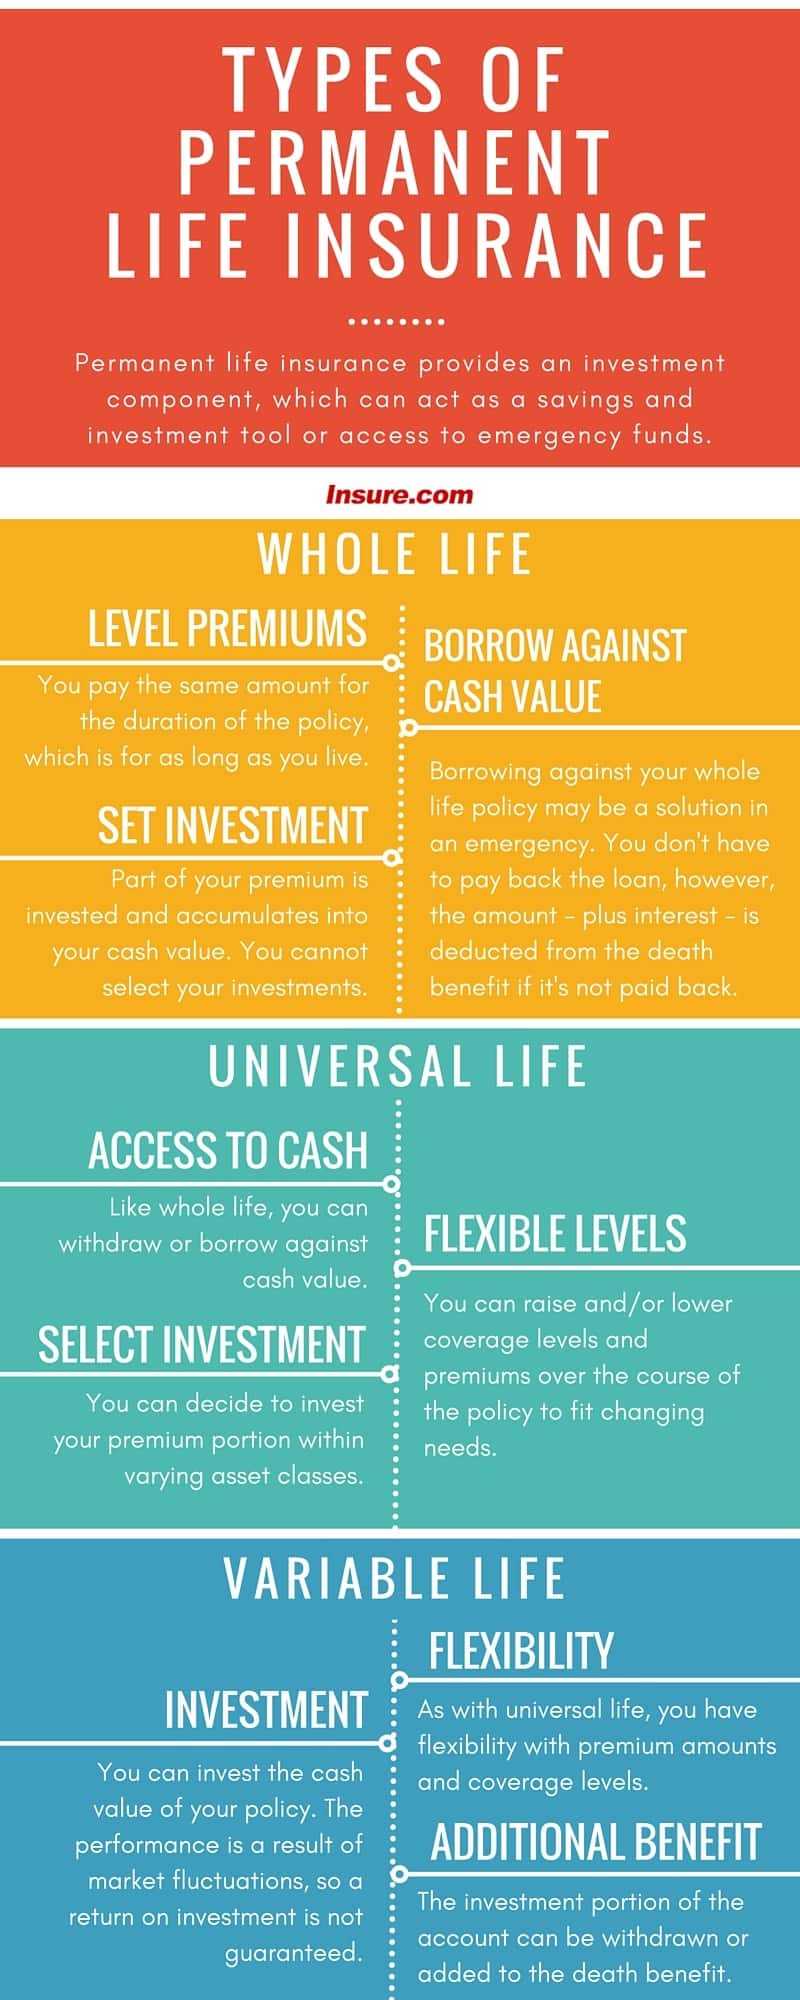 Types of permanent life insurance